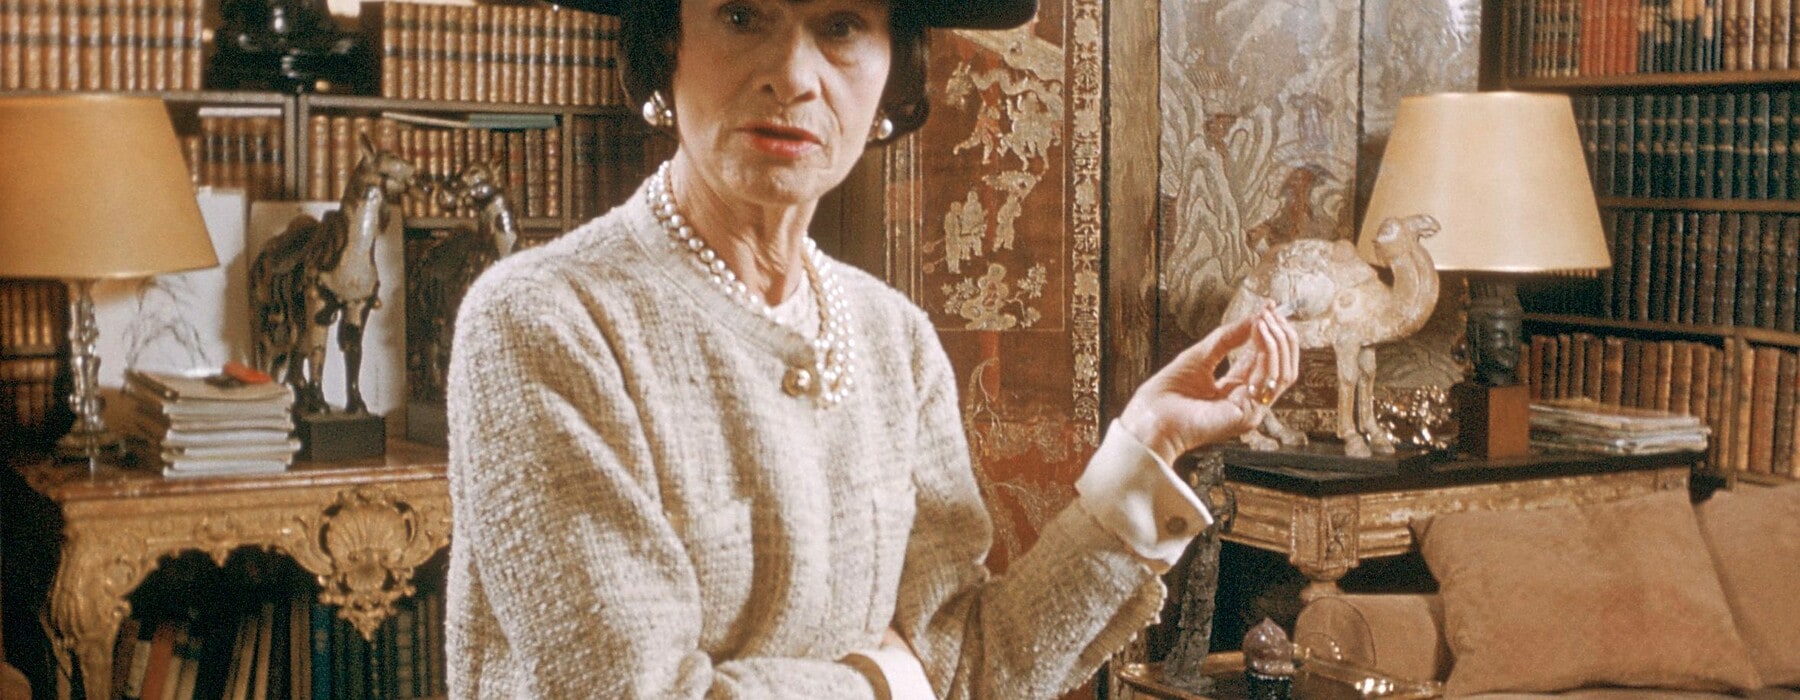 The truth Coco Chanel's scandalous double - WOMAN